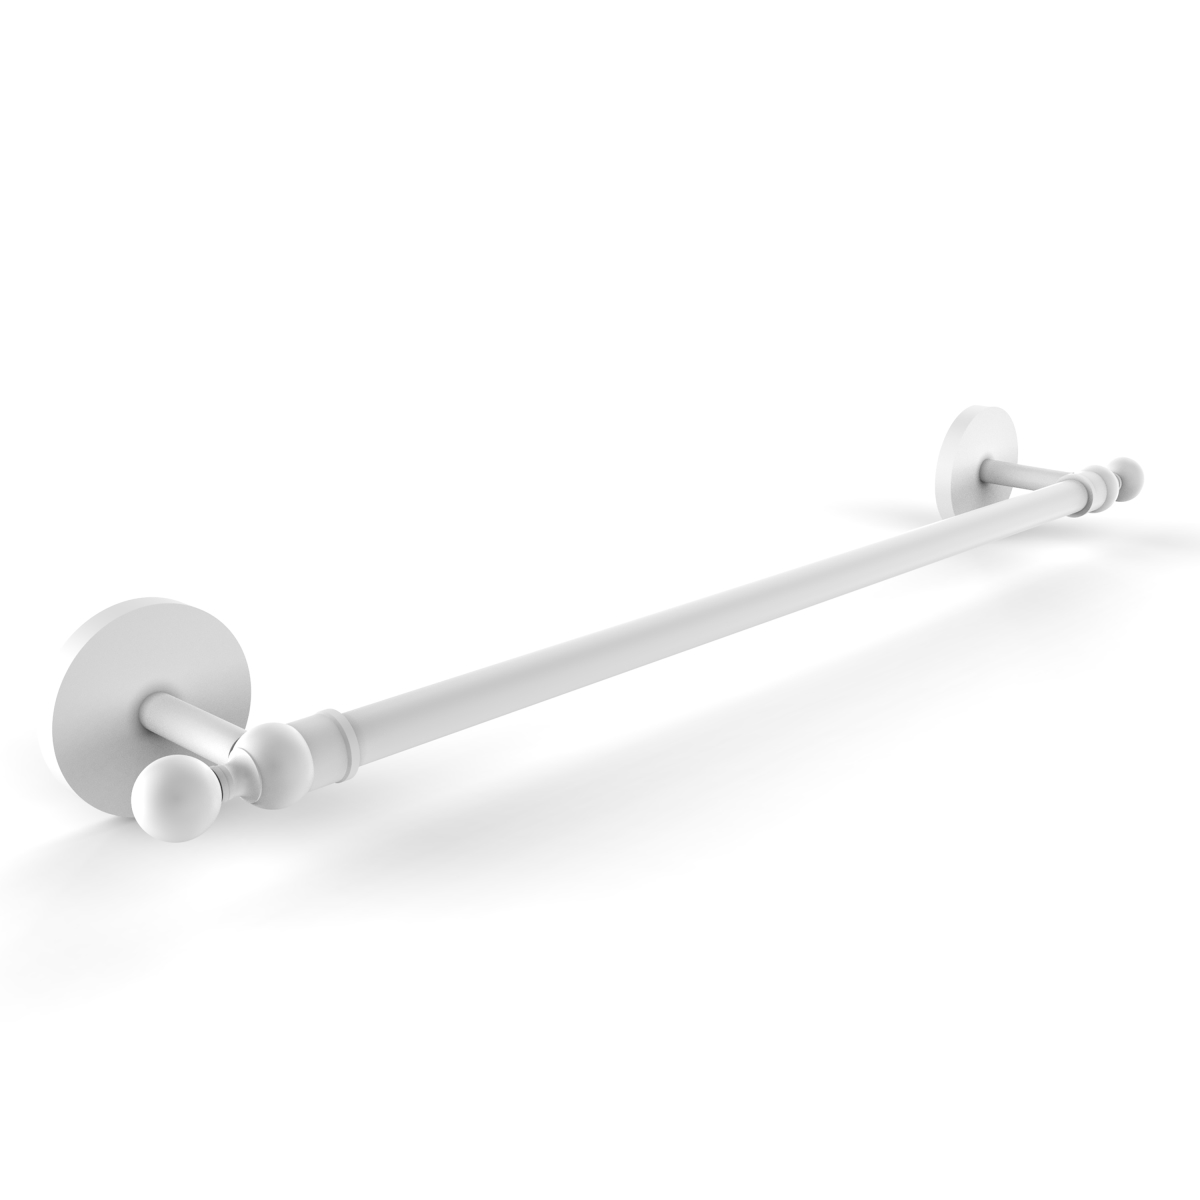 Allied Brass 1041-30-WHM 30 in. Skyline Collection Towel Bar, Matte White - 3 x 32.5 x 30 in.